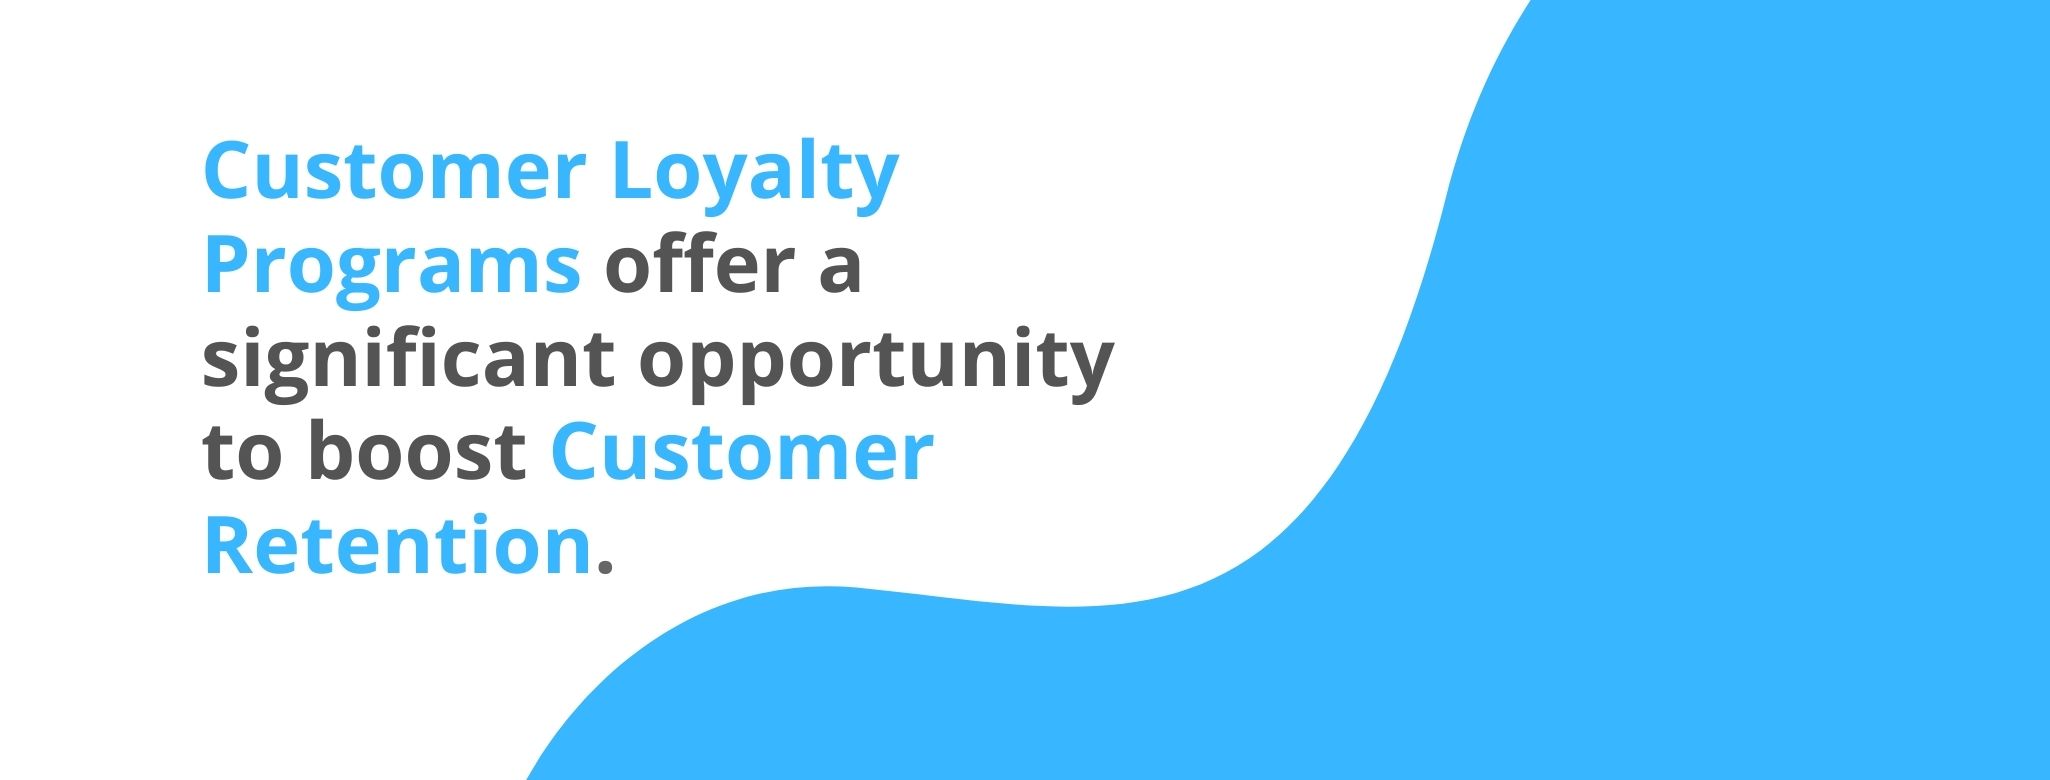 Customer loyalty programs offer a significant opportunity to boost customer retention - 32 Customer Retention Strategies - Replyco